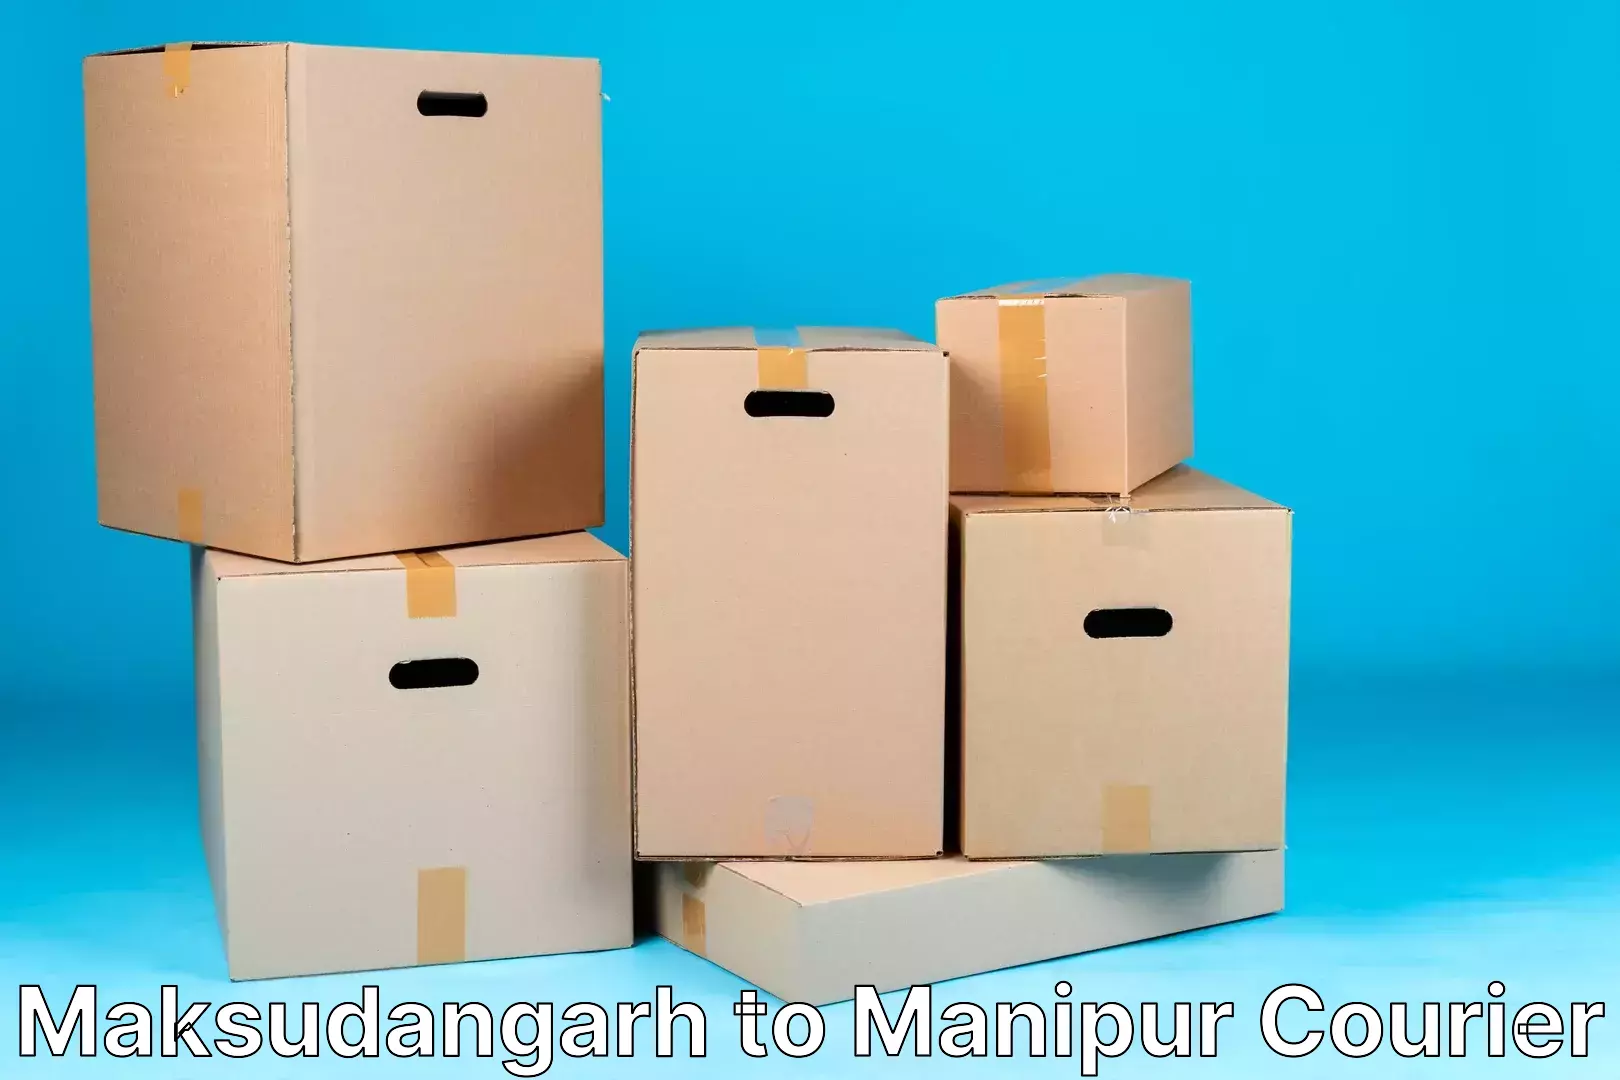 Next-day delivery options Maksudangarh to Manipur